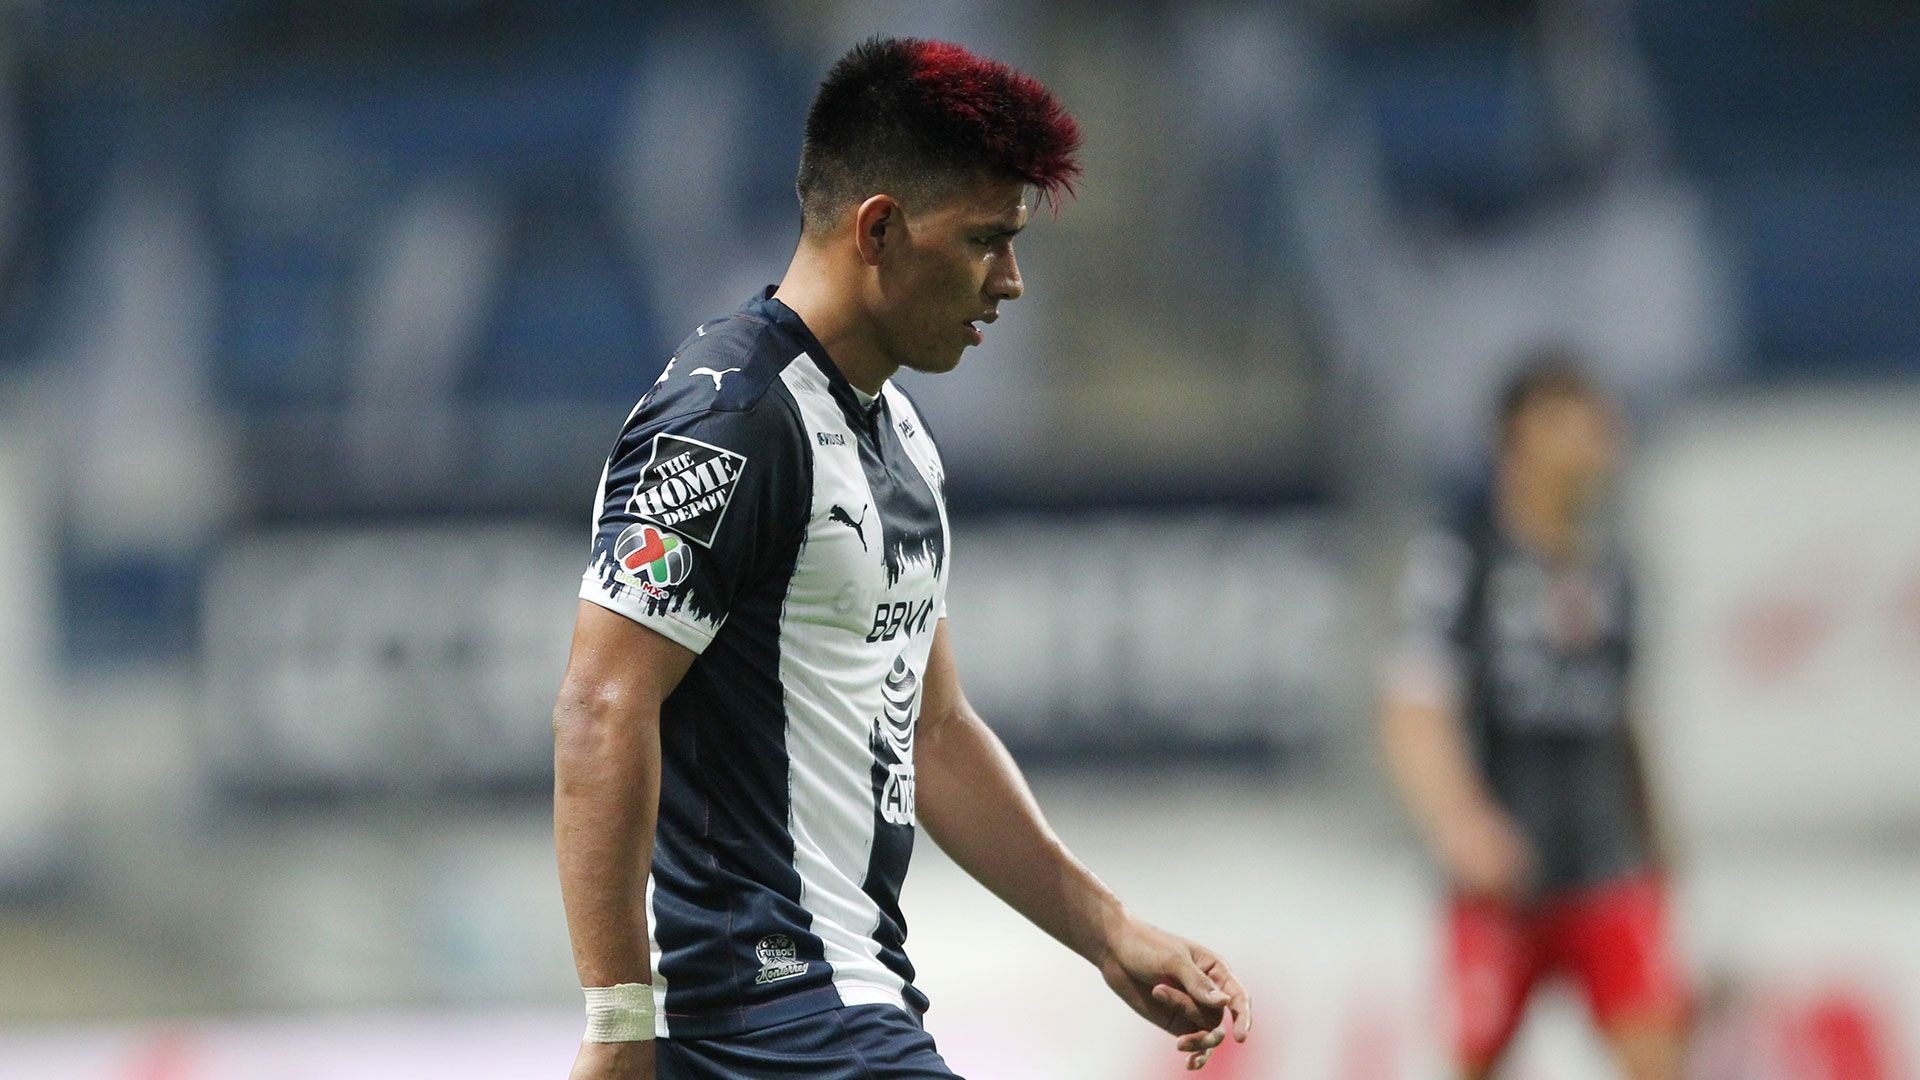 another player from monterrey celebrates birthday amid the pandemic